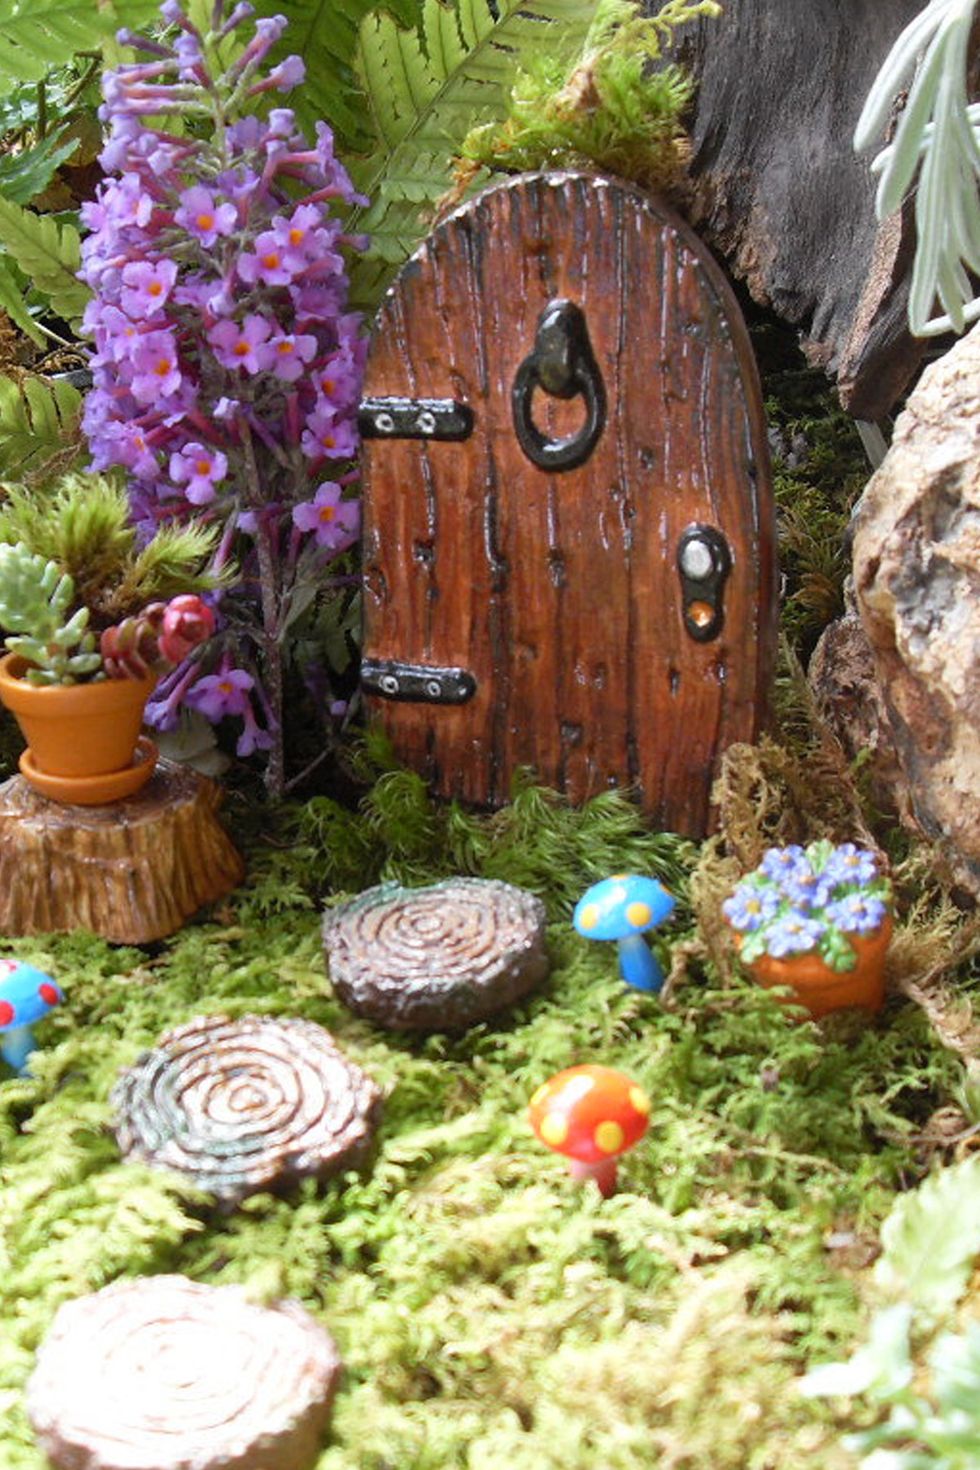 Shop - FAIRY GARDEN ACCESSORIES - Page 1 - Fairy Homes and Gardens